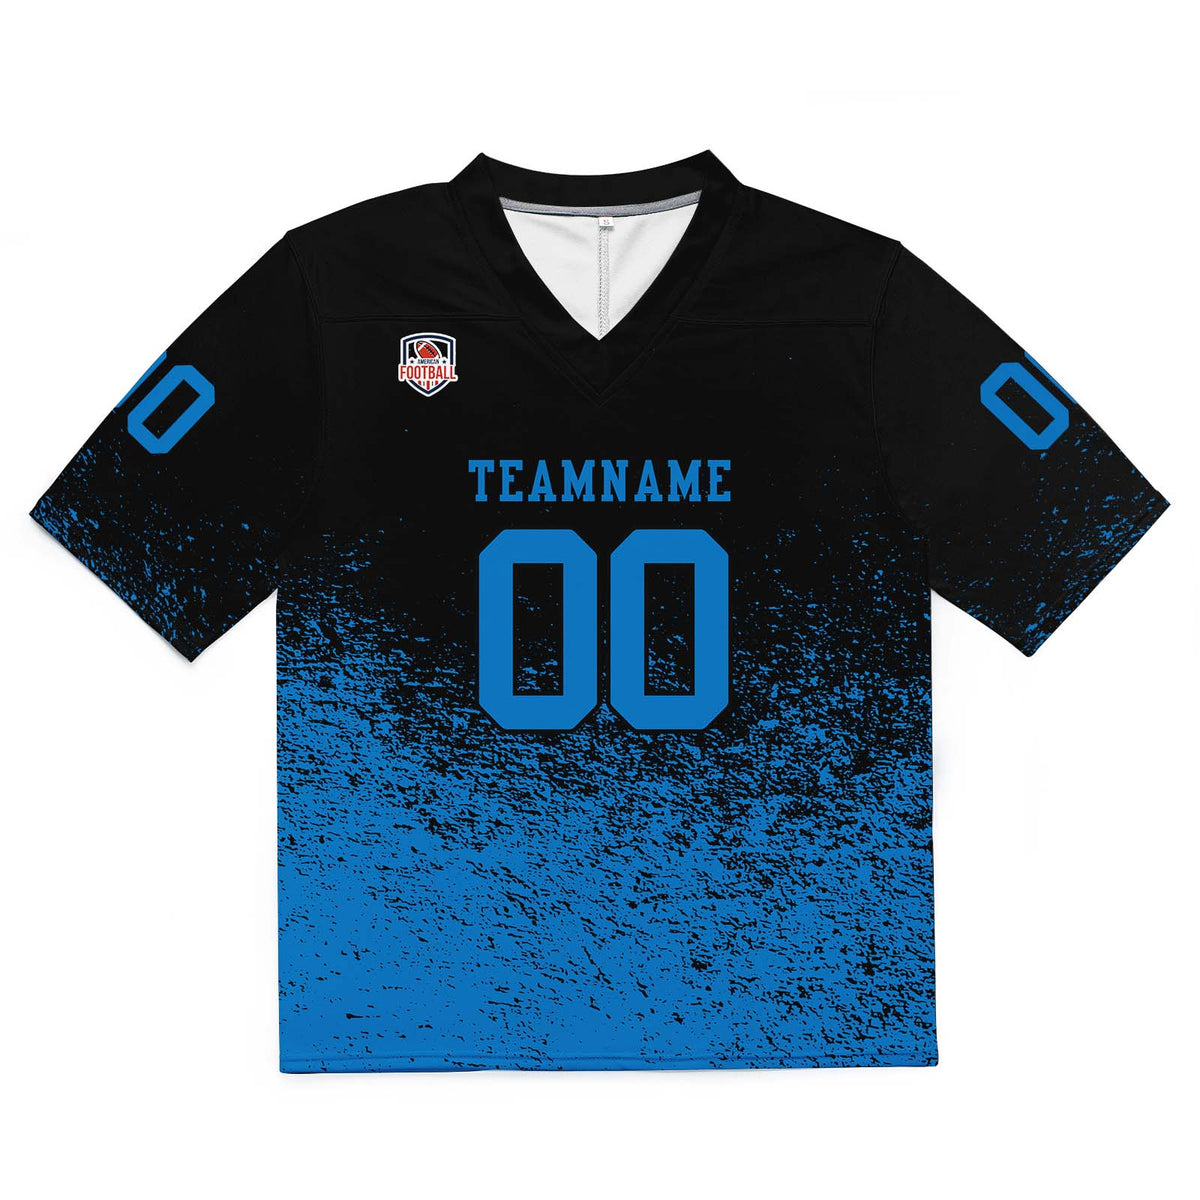 Custom Football Jersey Shirt Personalized Stitched Printed Team Name Number Black & Blue